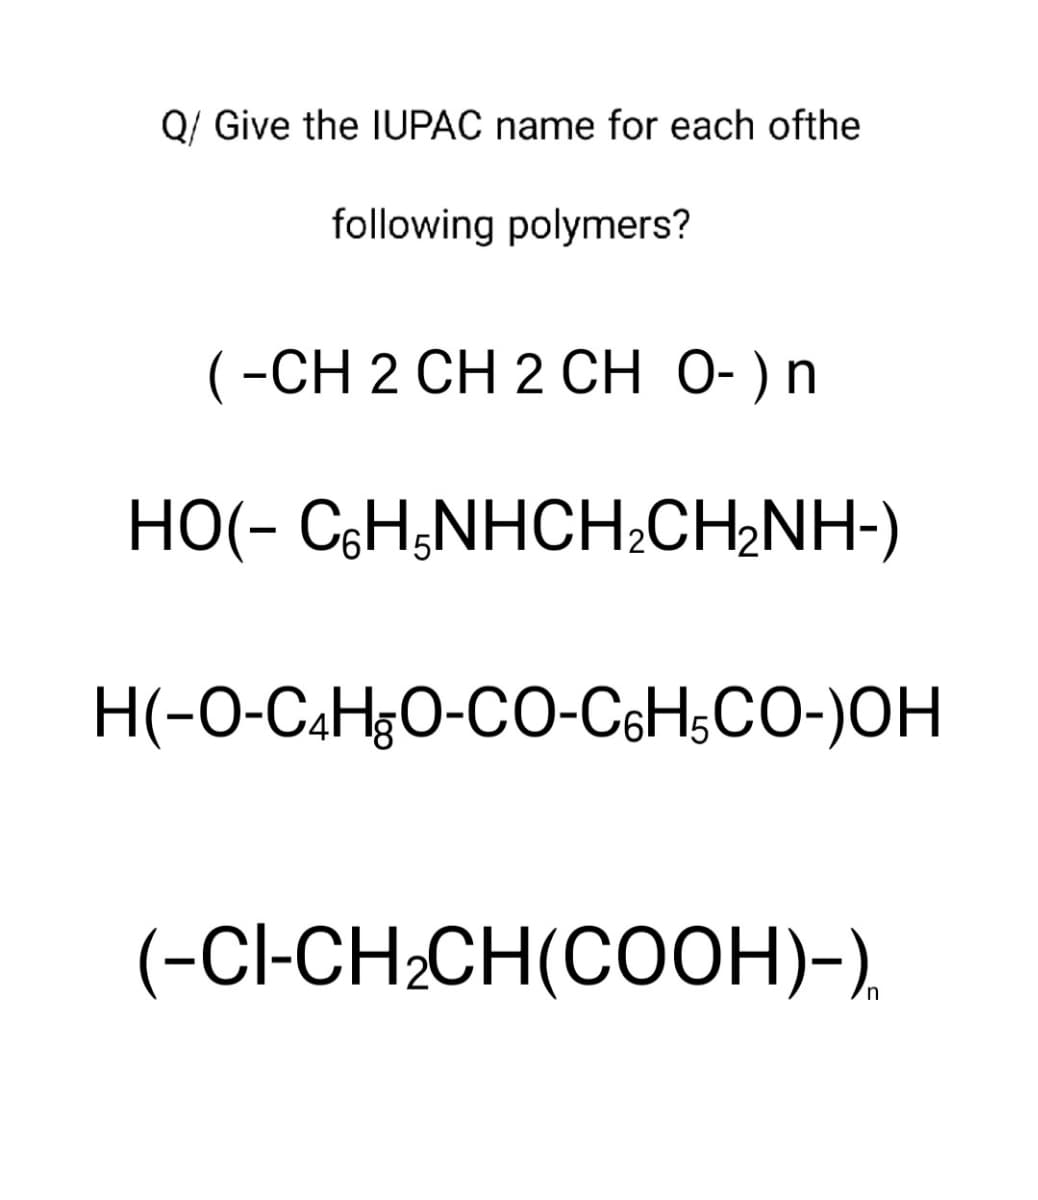 Q/ Give the IUPAC name for each ofthe
following polymers?
(-CH 2 CH 2 CH 0-) n
HO(- C%H,NHCH,CH2NH-)
H(-O-C4HgO-CO-C6H5CO-)OH
(-CI-CH₂CH(COOH)-)